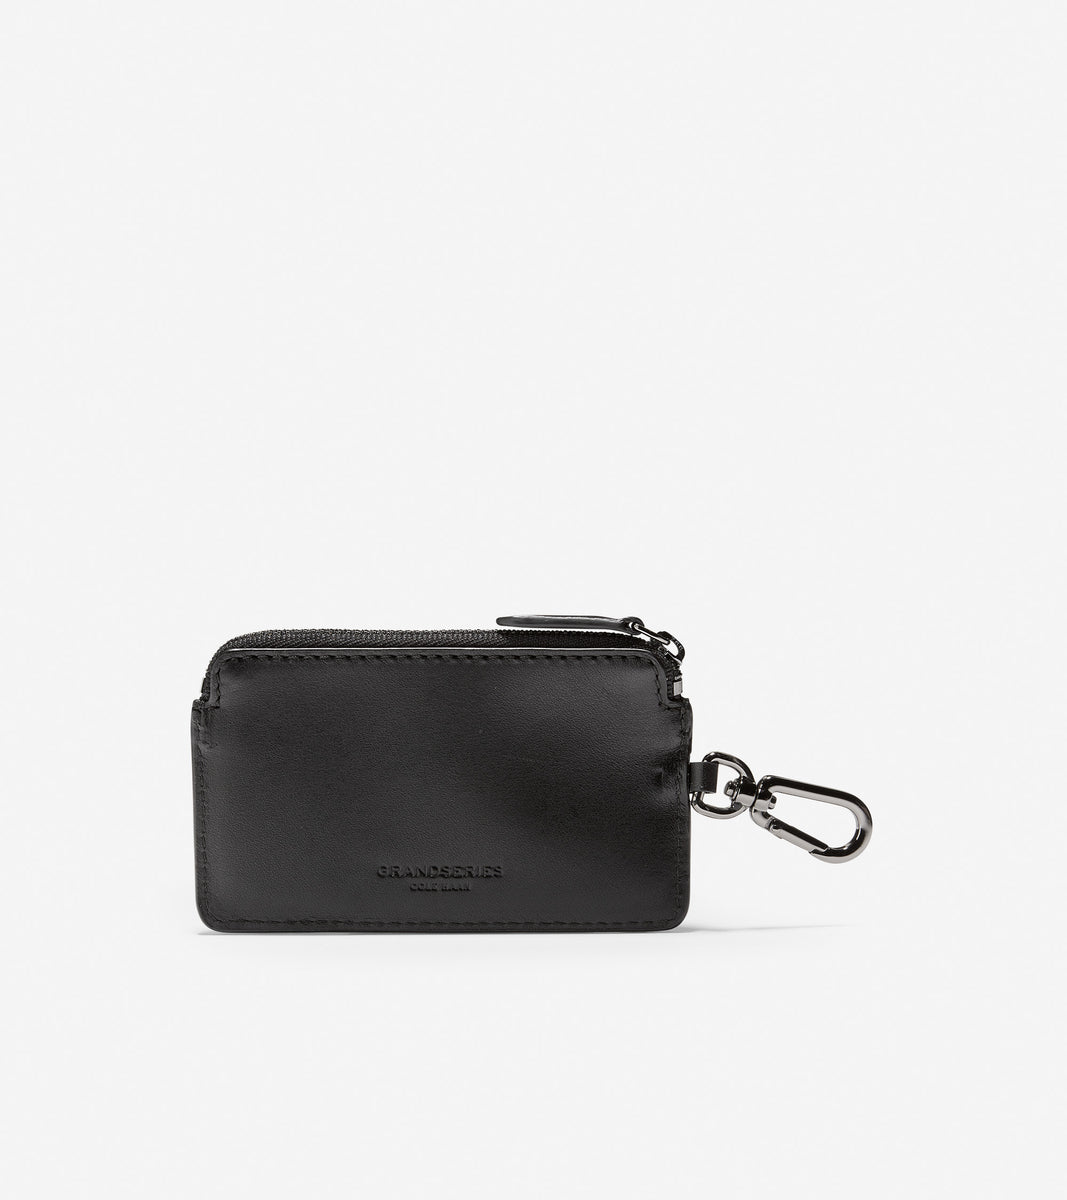 ColeHaan-GRANDSERIES Leather Zip Card Case With Key Ring-f11440-Black